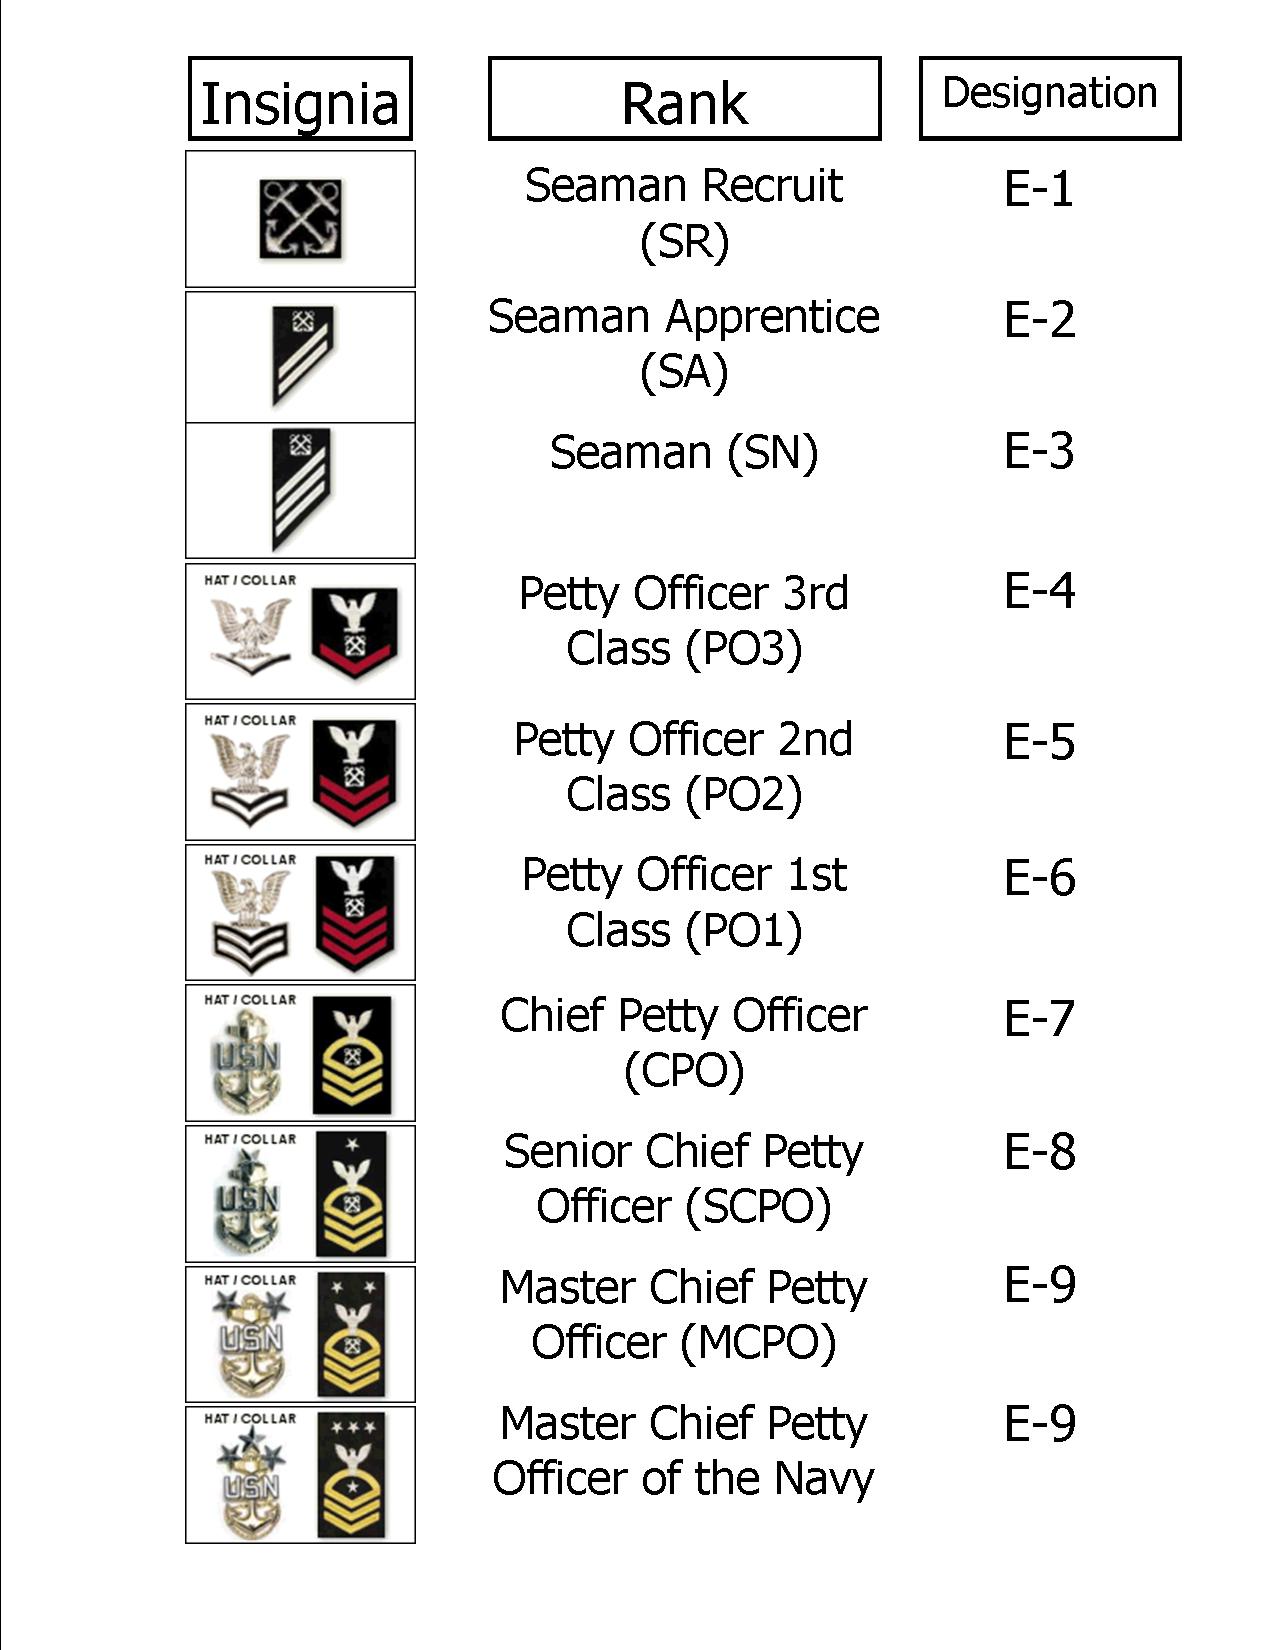 Image Navy Ranks Enlisted jpg Star Wars Military Squads Wiki